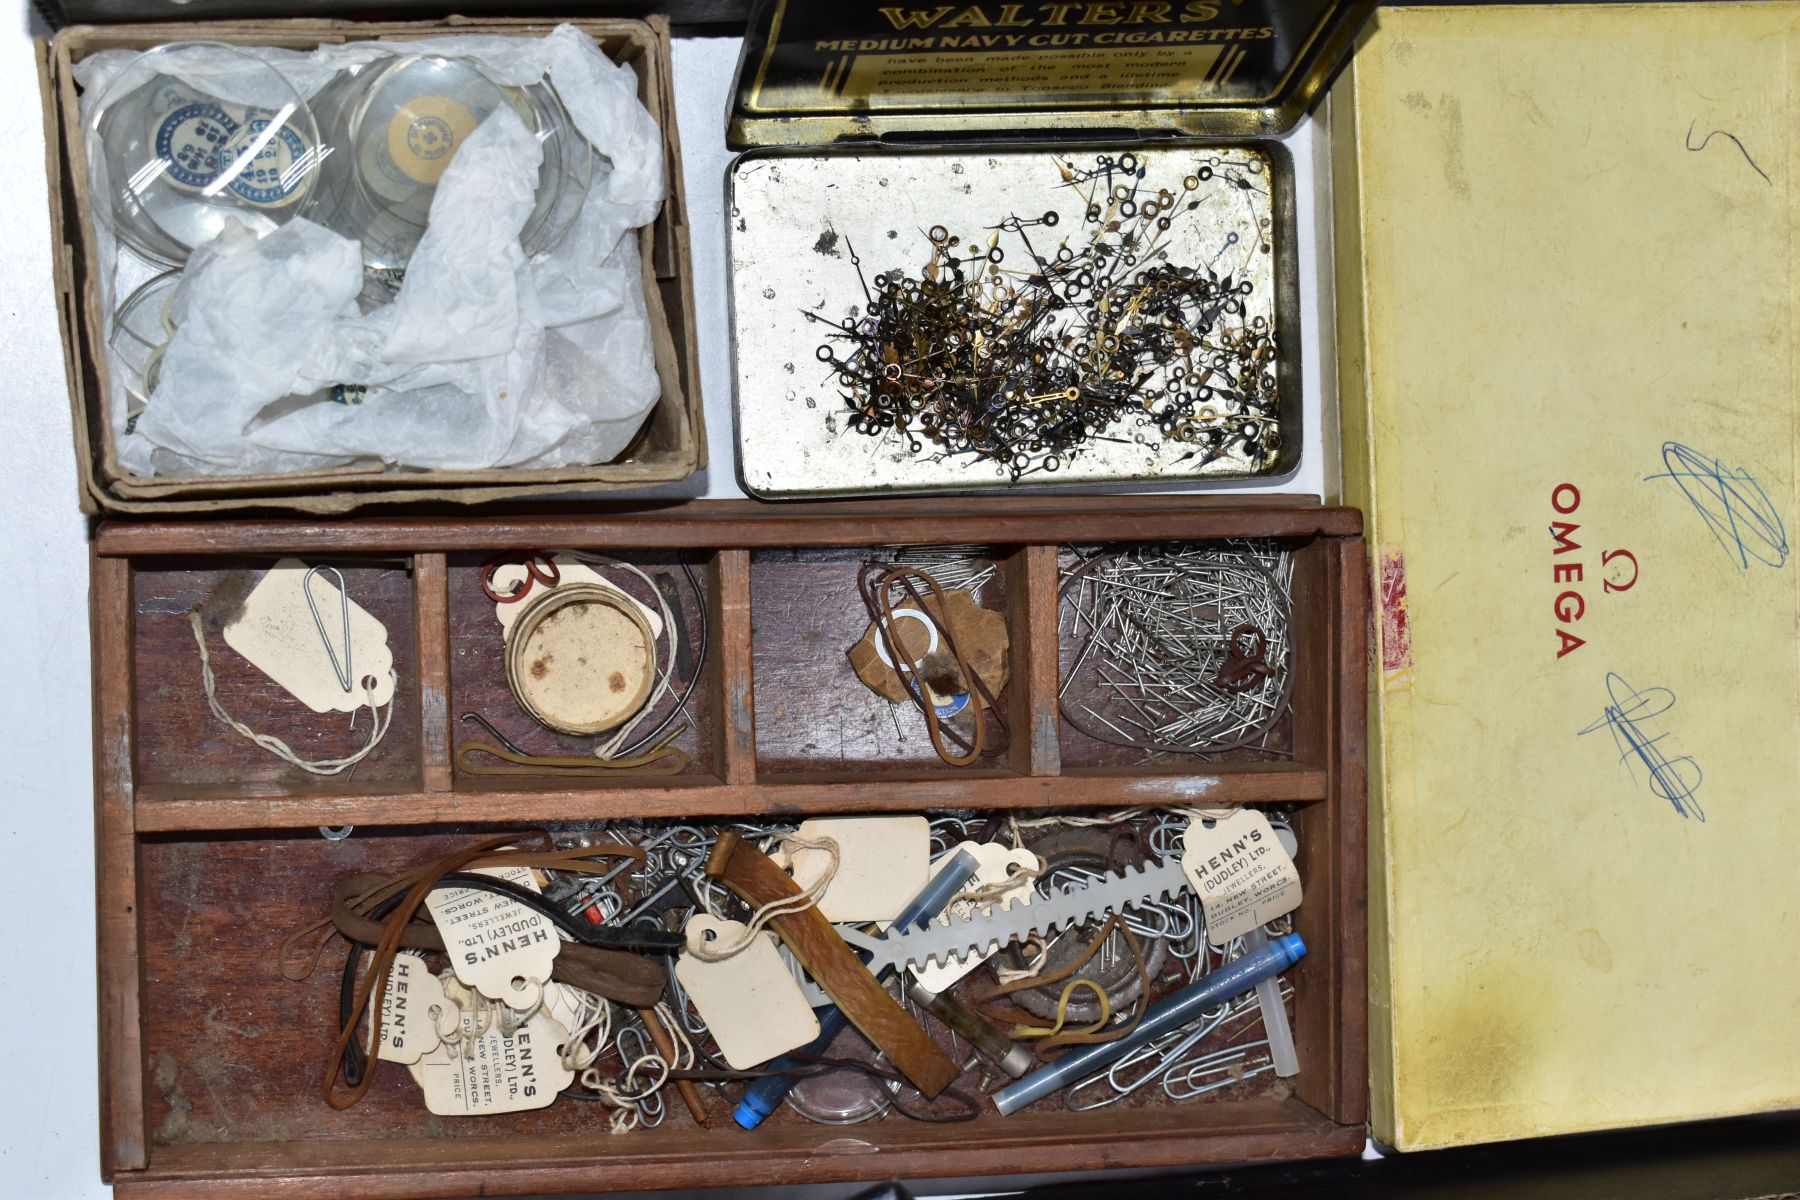 TWO BOXES OF ASSORTED WATCH MAKERS PARTS, GLASSES, COGS, SPRINGS, CROWNS, DECONSTTUCTED WATCH - Image 4 of 30